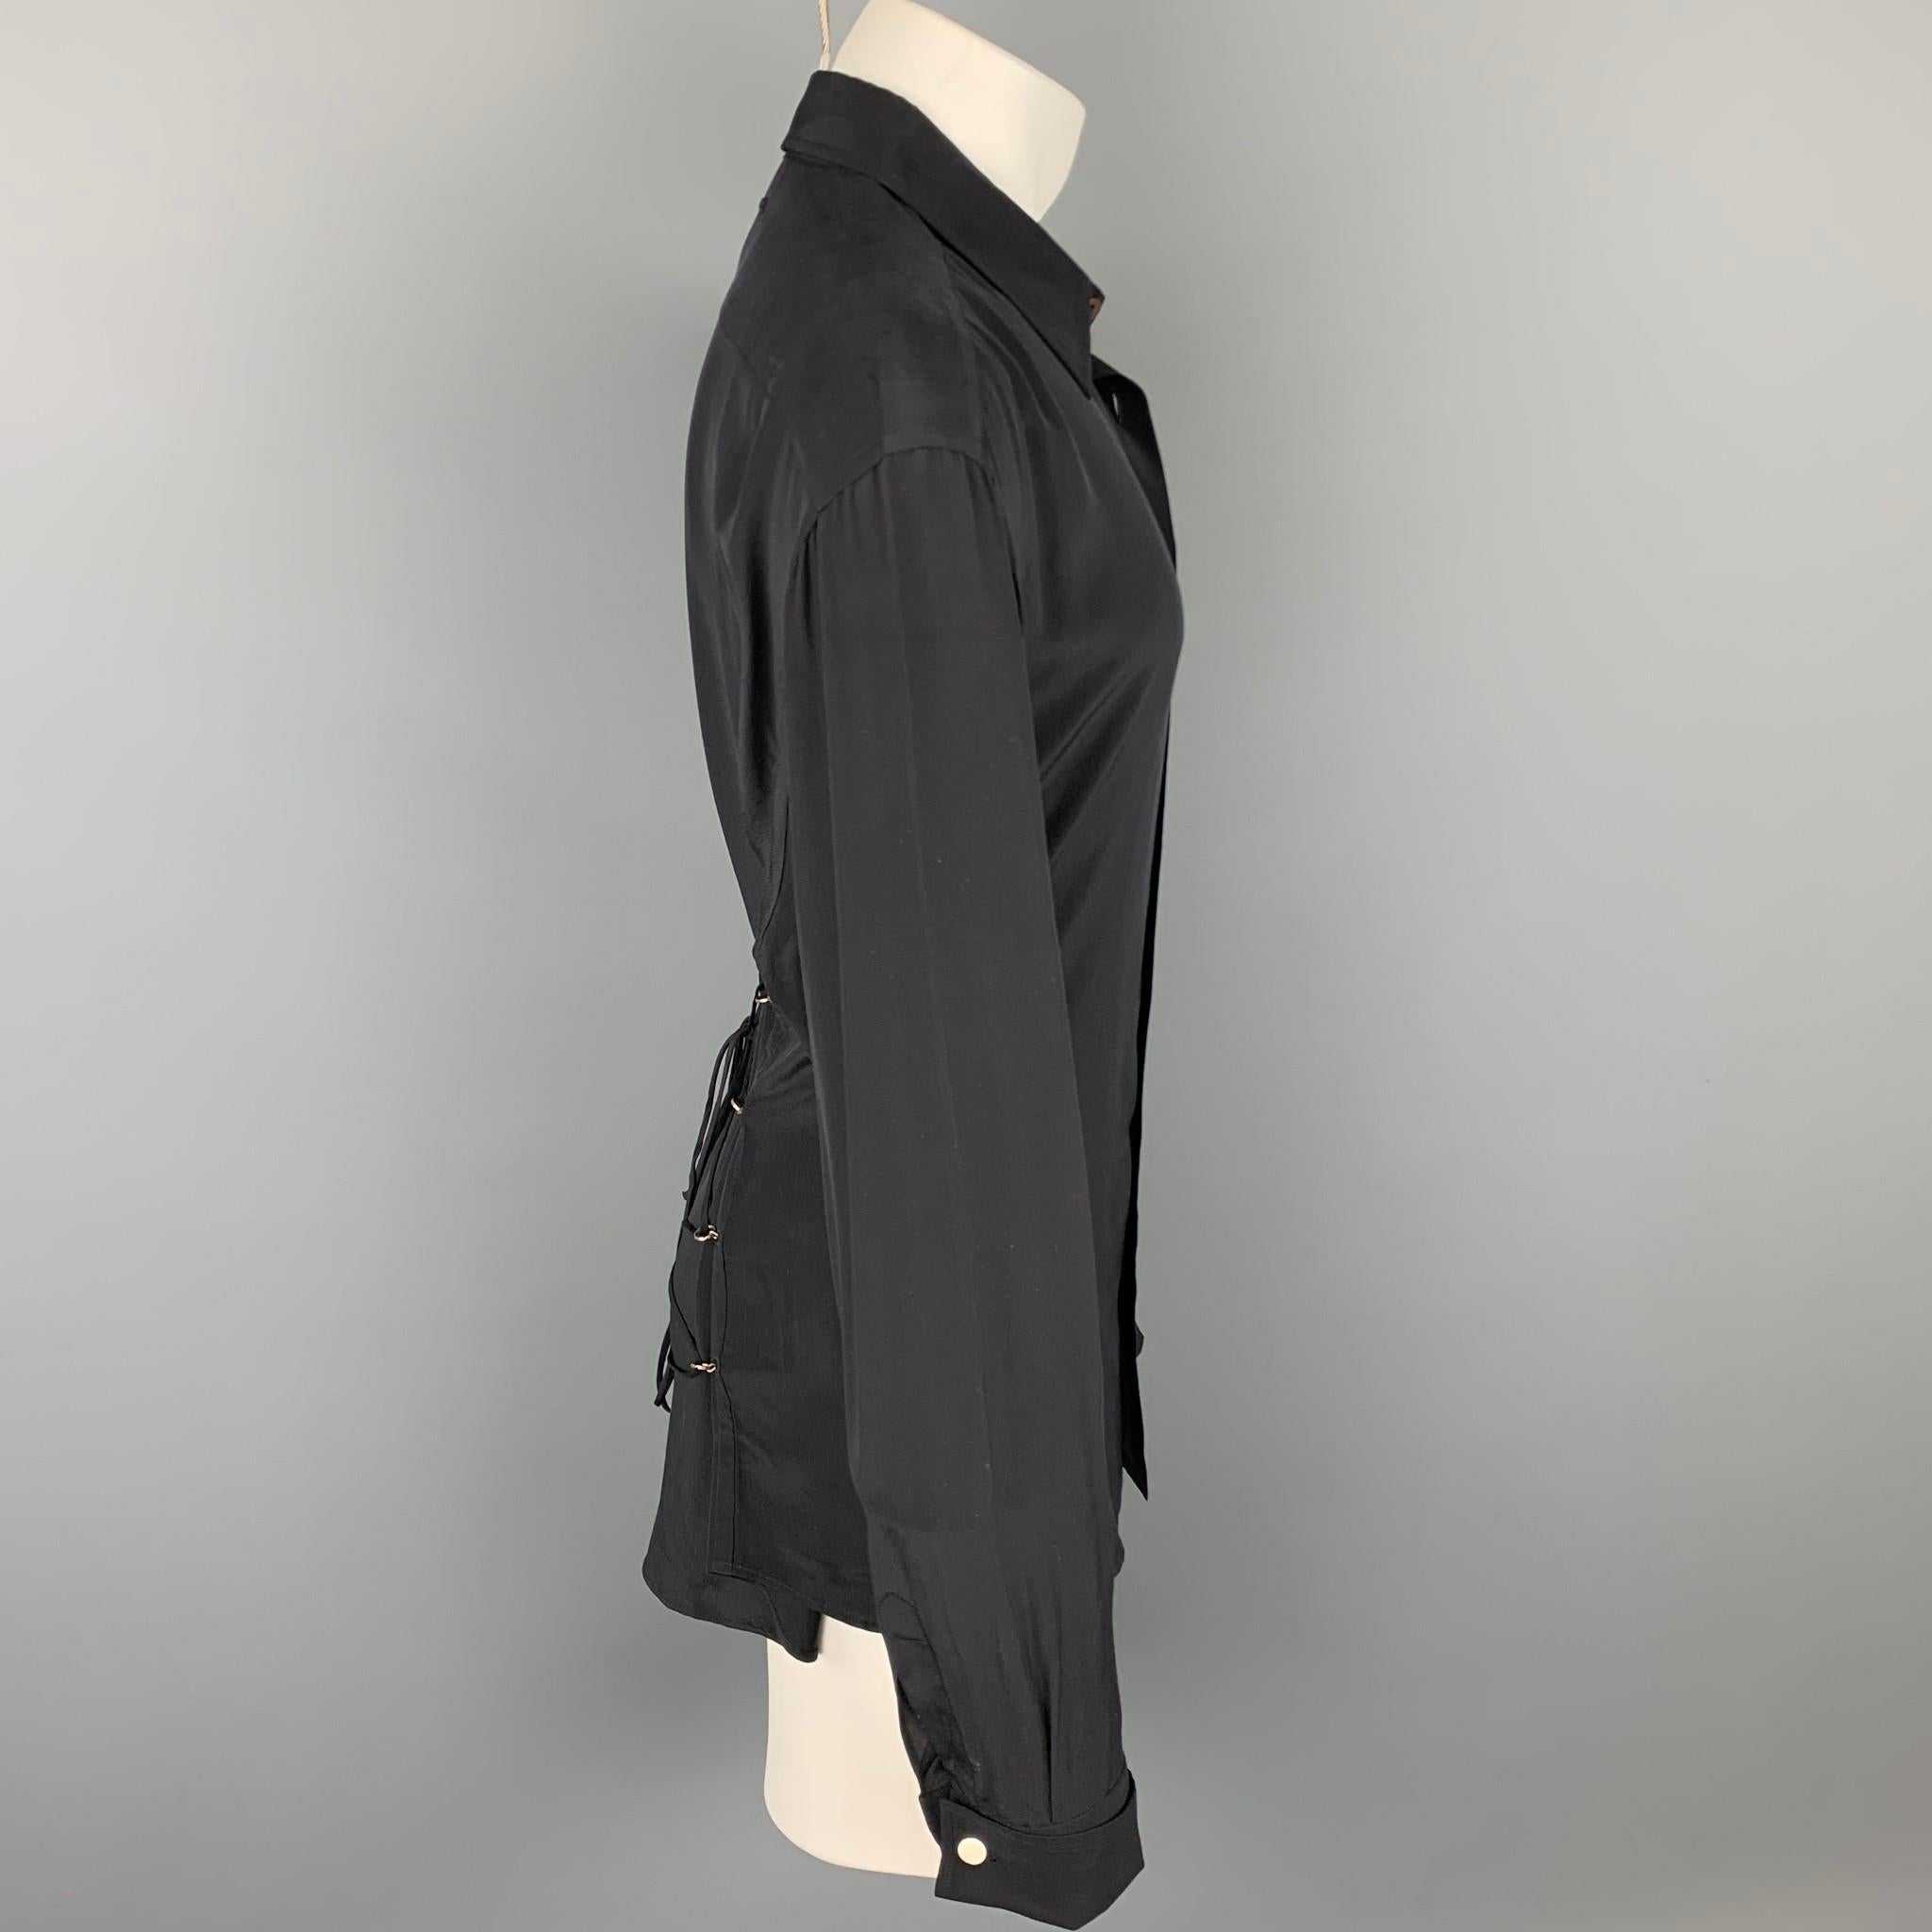 JEAN PAUL GAULTIER long sleeve shirt comes in a black silk featuring a corset back, french cuffs, front patch pocket, spread collar, and a button up closure. Made in Italy.

Very Good Pre-Owned Condition.
Marked: 44

Measurements:

Shoulder: 21